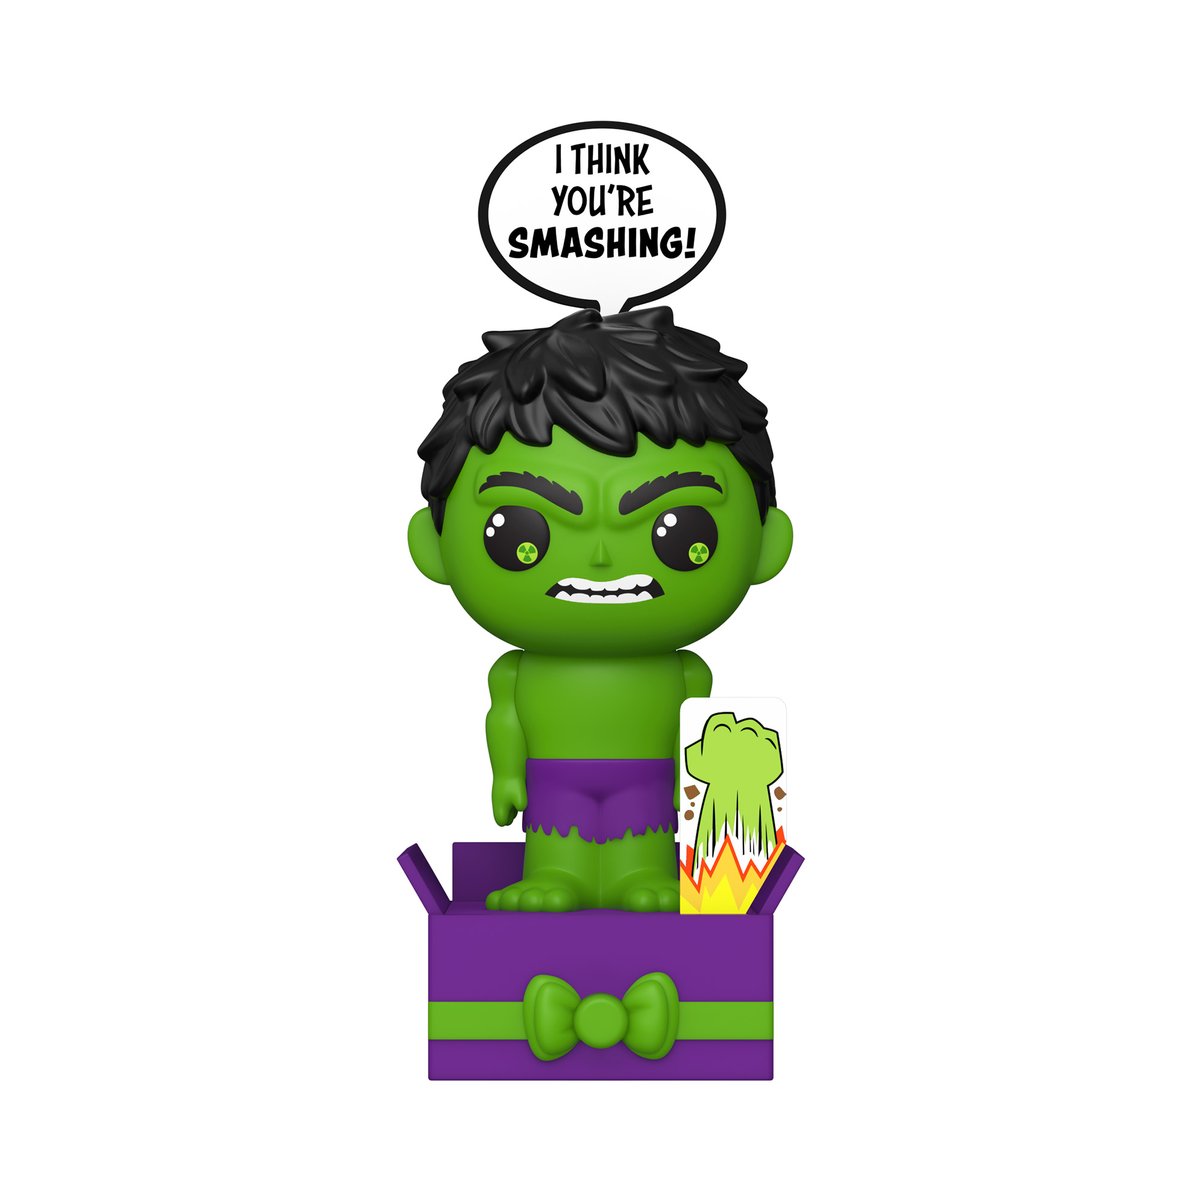 RT and follow @OriginalFunko for the chance to WIN a Marvel: Hulk Popsies™! Not feeling lucky? Order now: bit.ly/3yGYDNh #Funko #FunkoPOP #Giveaway #Marvel @Hulk